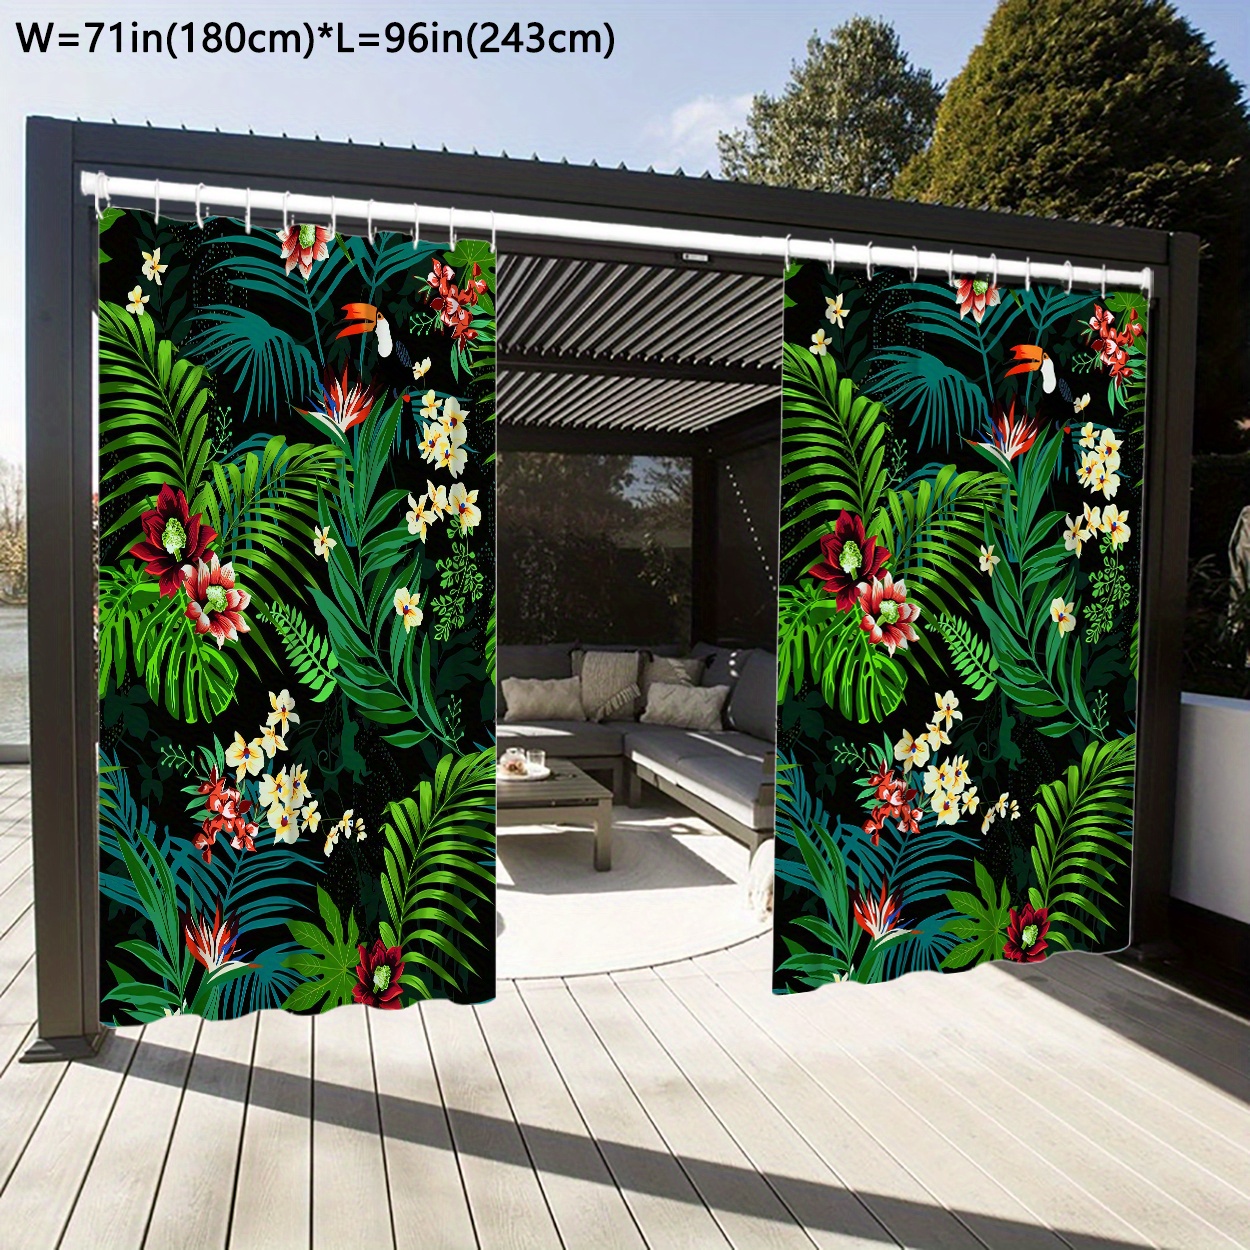 

1pc Outdoor Curtains, Waterproof Outdoor Garden Curtains, Modern Style Plant Theme Yard Curtains, Leaf And Flower Pattern Curtains For Outside Booth, Hallway, Patio, 71*96in